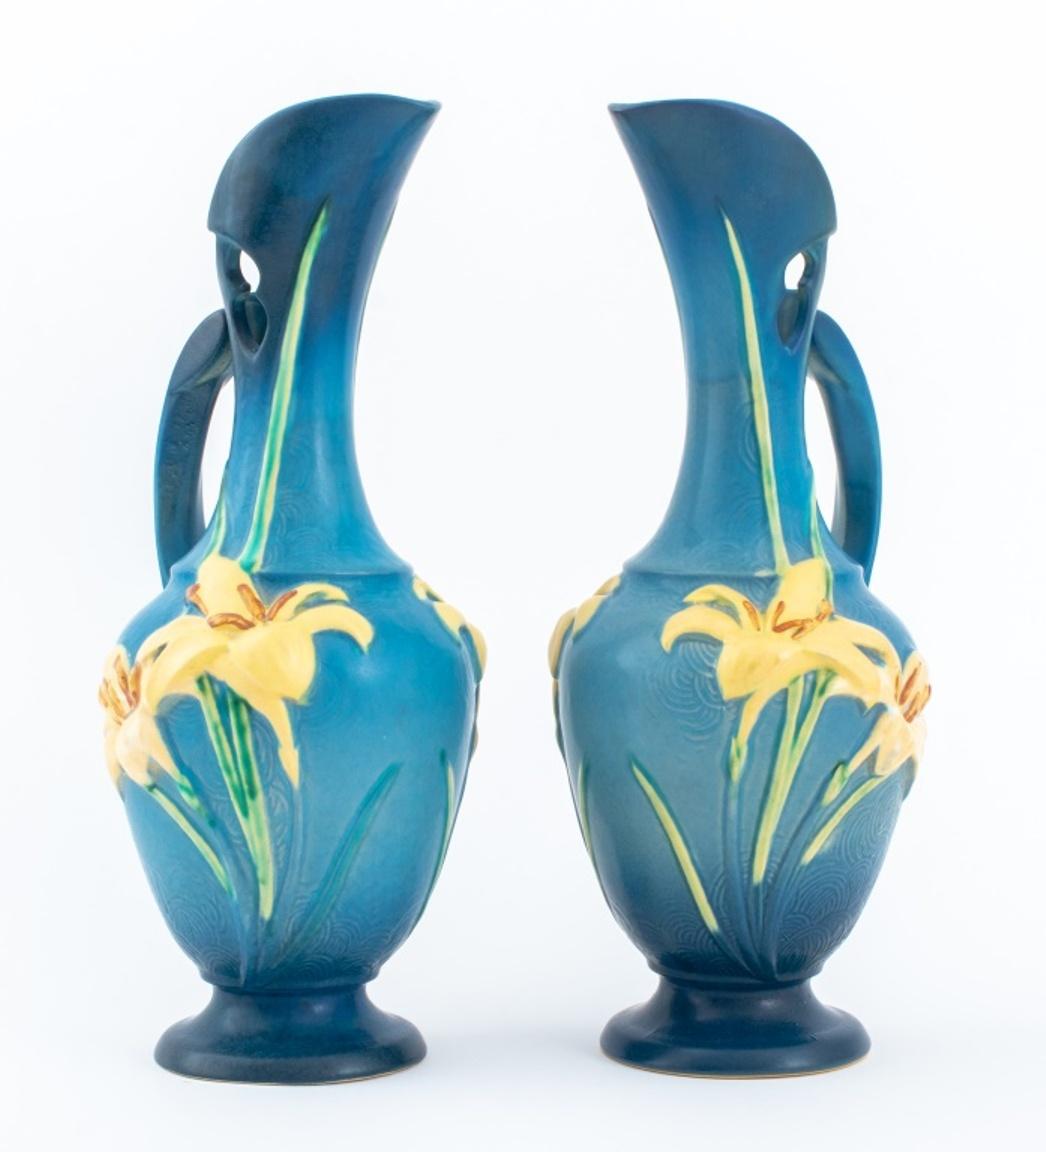 Pair of Roseville Pottery ceramic pitchers in the Zephyr Lily pattern on blue glazed grounds, each marked 